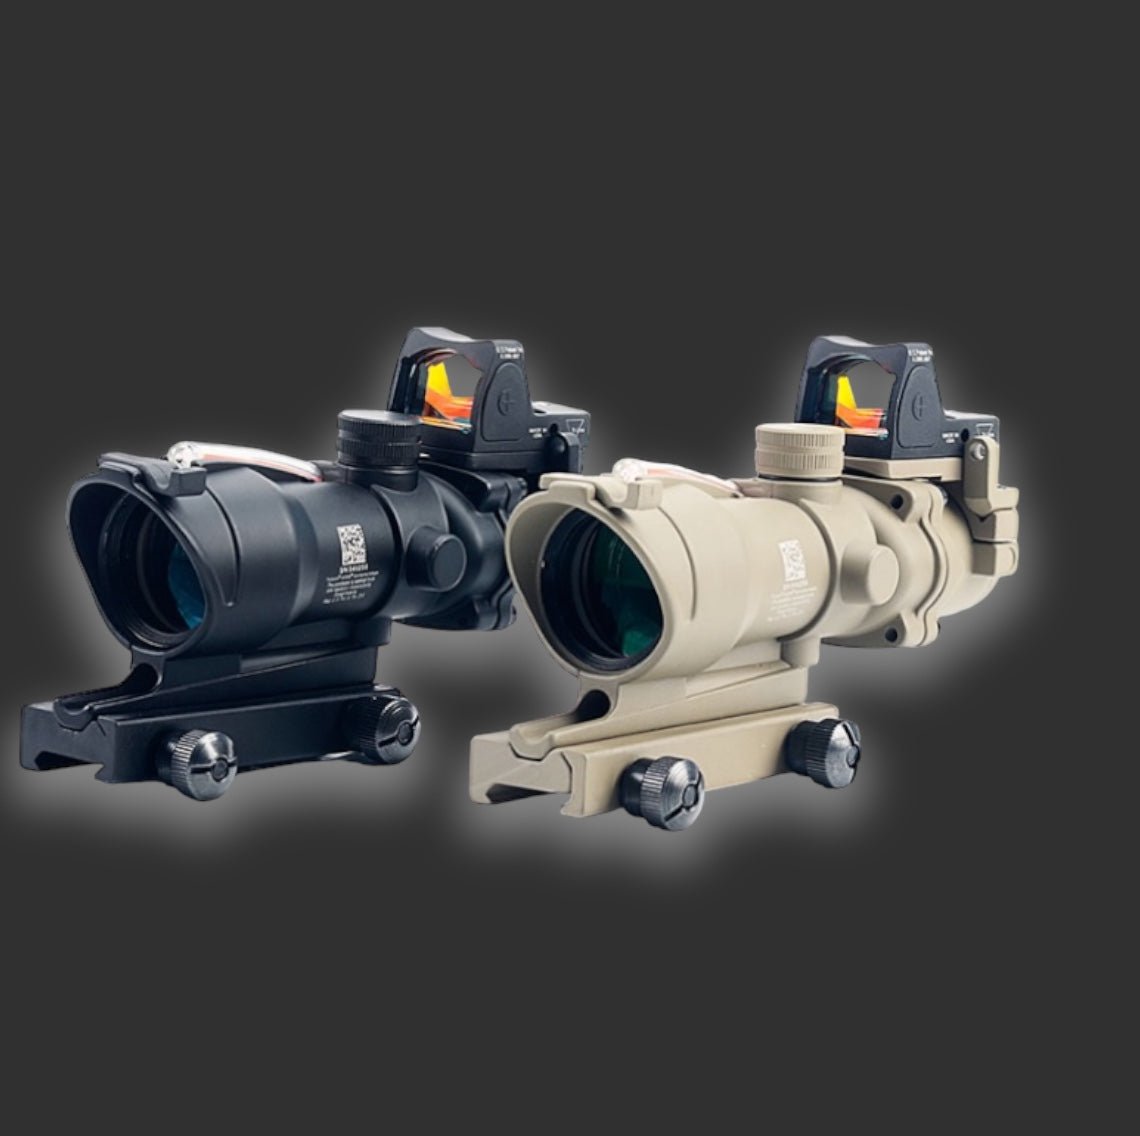 Two rifle scopes with mounted reflex sights: one in black, the other in tan, displayed against a dark background. The BlasterMasters ACOG Conch+DOC Metal Scope models boast precision engineering with metal scopes and compatibility with 20mm rails for reliable performance.